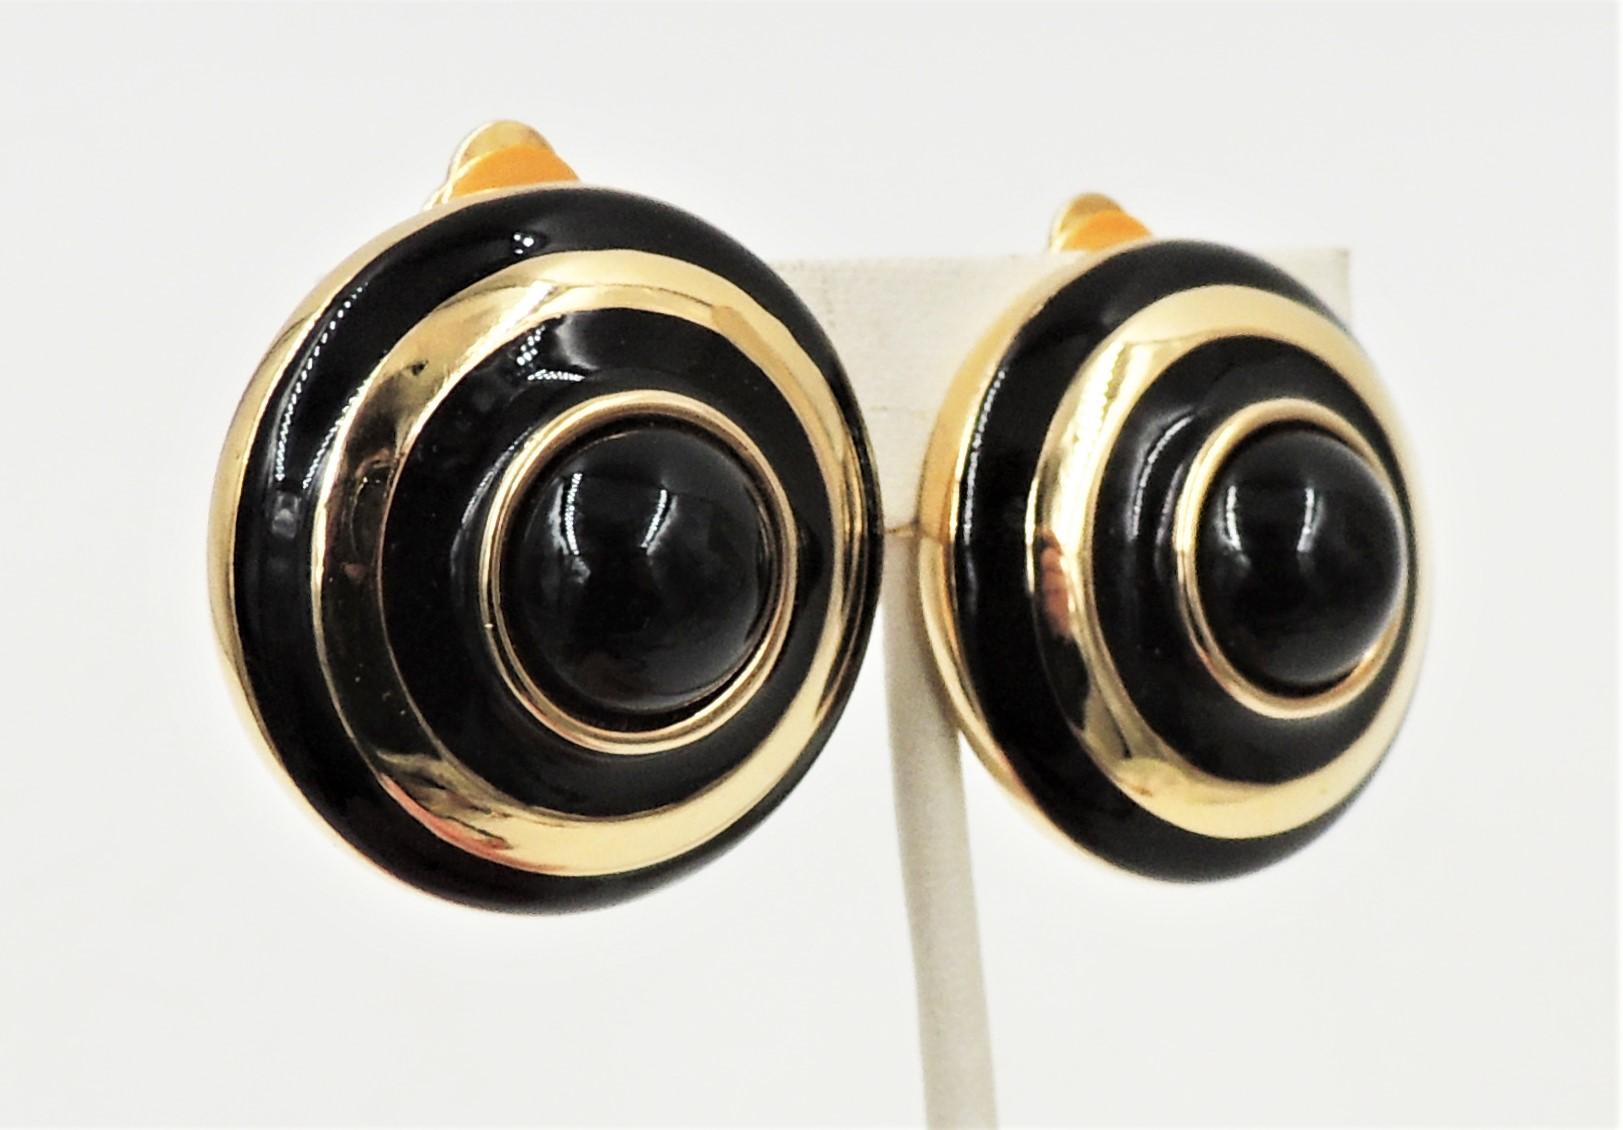 Circa 1980s gold plated cabochon faux-onyx rhinestone and black enamel clip back earrings. Marked with the Courrèges symbol. Measure: 1.38 inches across. Excellent condition.

Courreges is a French haute couture fashion house known for its modernism